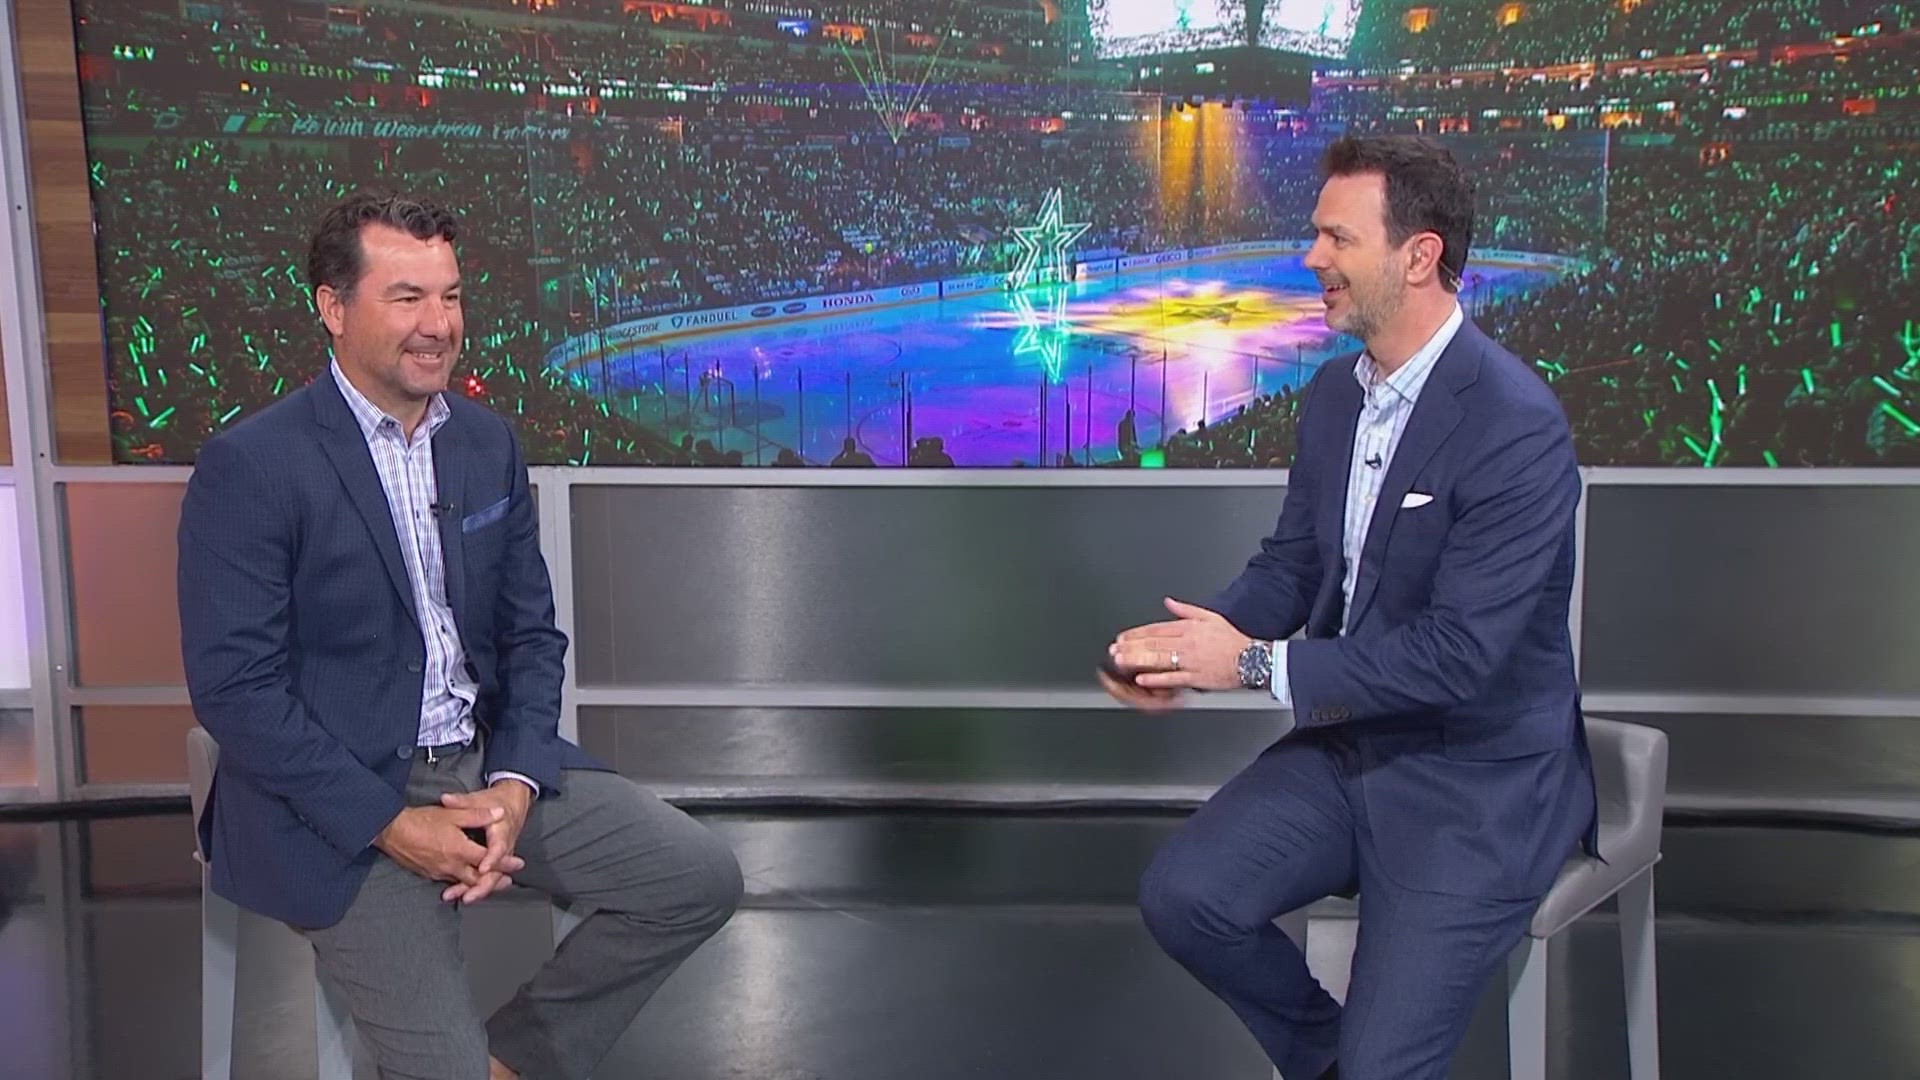 Now the president of the Dallas Stars Foundation, former goalie Marty Turco joined WFAA Daybreak to give his thoughts ahead of Stanley Cup playoffs Round 2.